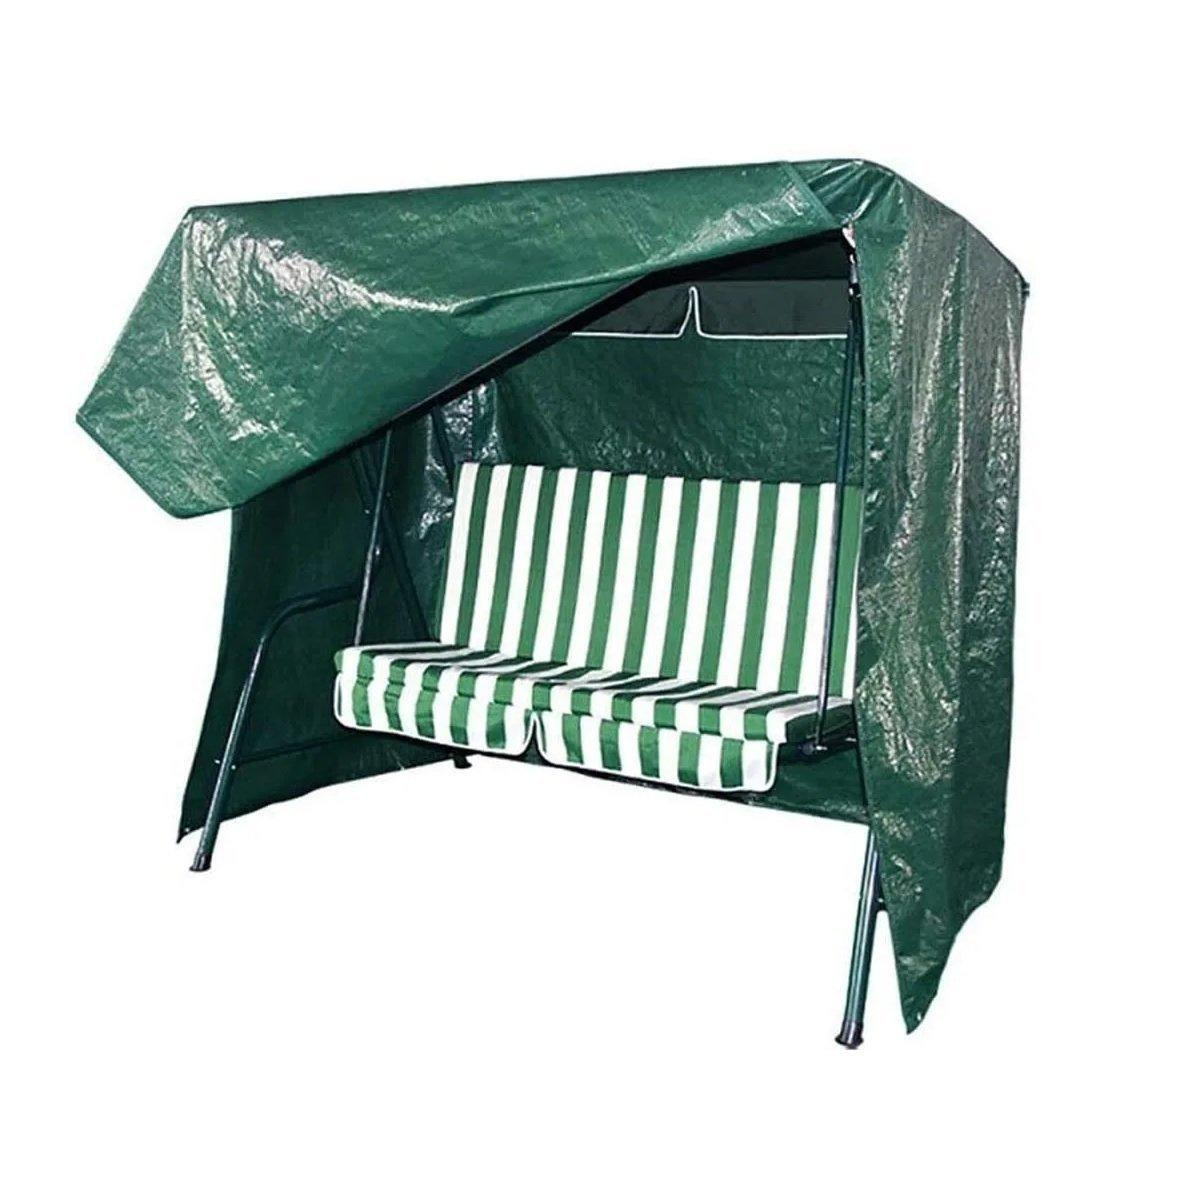 Waterproof 7ft Garden Furniture 3 Seater Swing Bench Cover - image 1